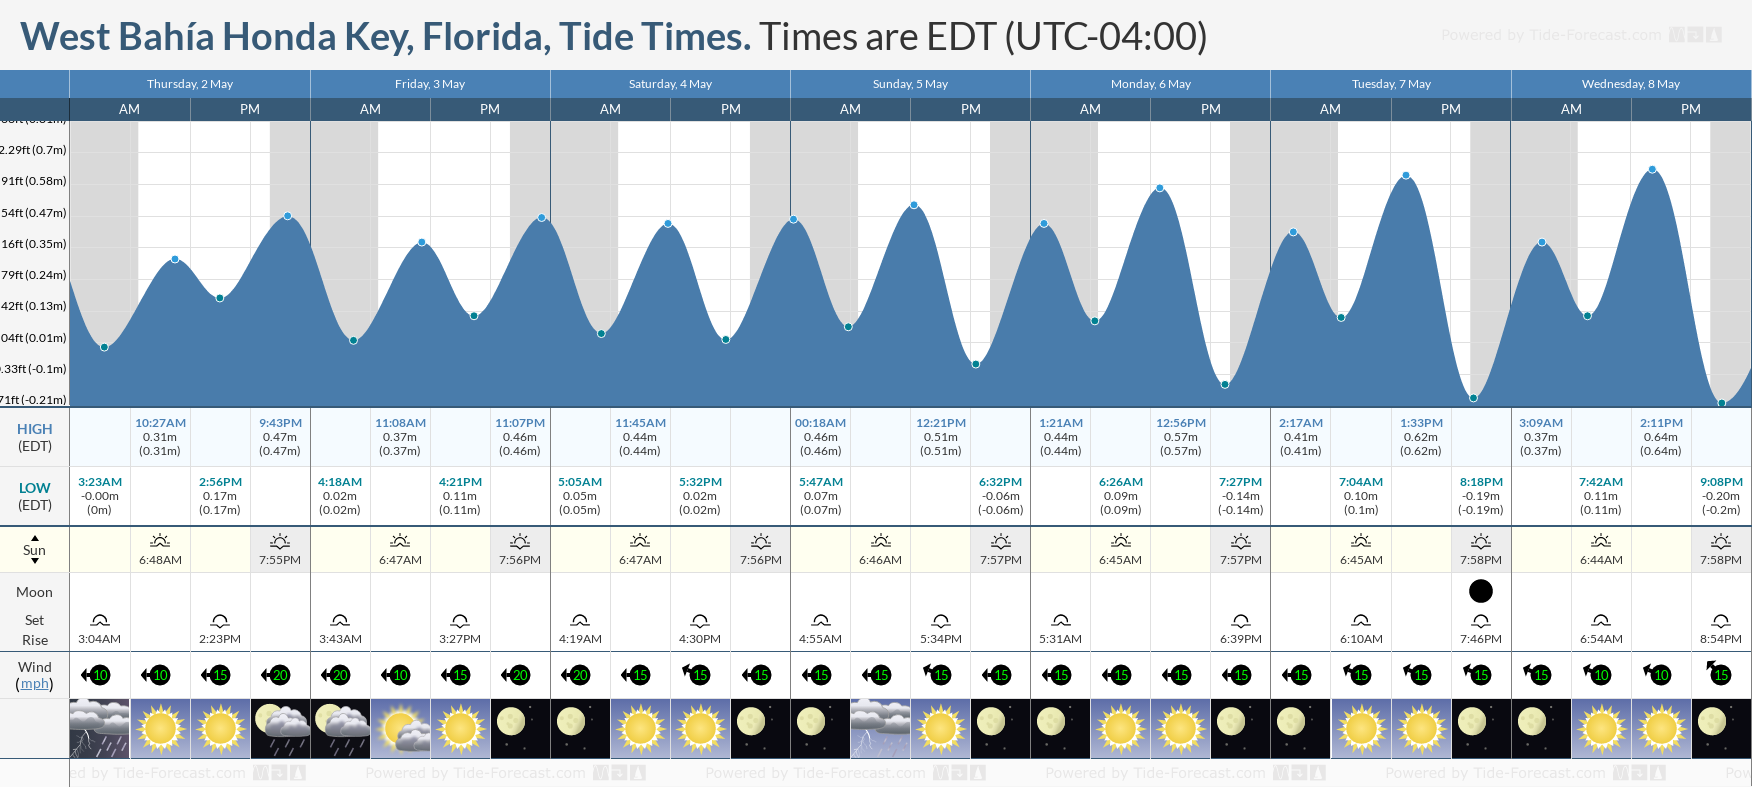 West Bahía Honda Key, Florida Tide Chart including high and low tide tide times for the next 7 days